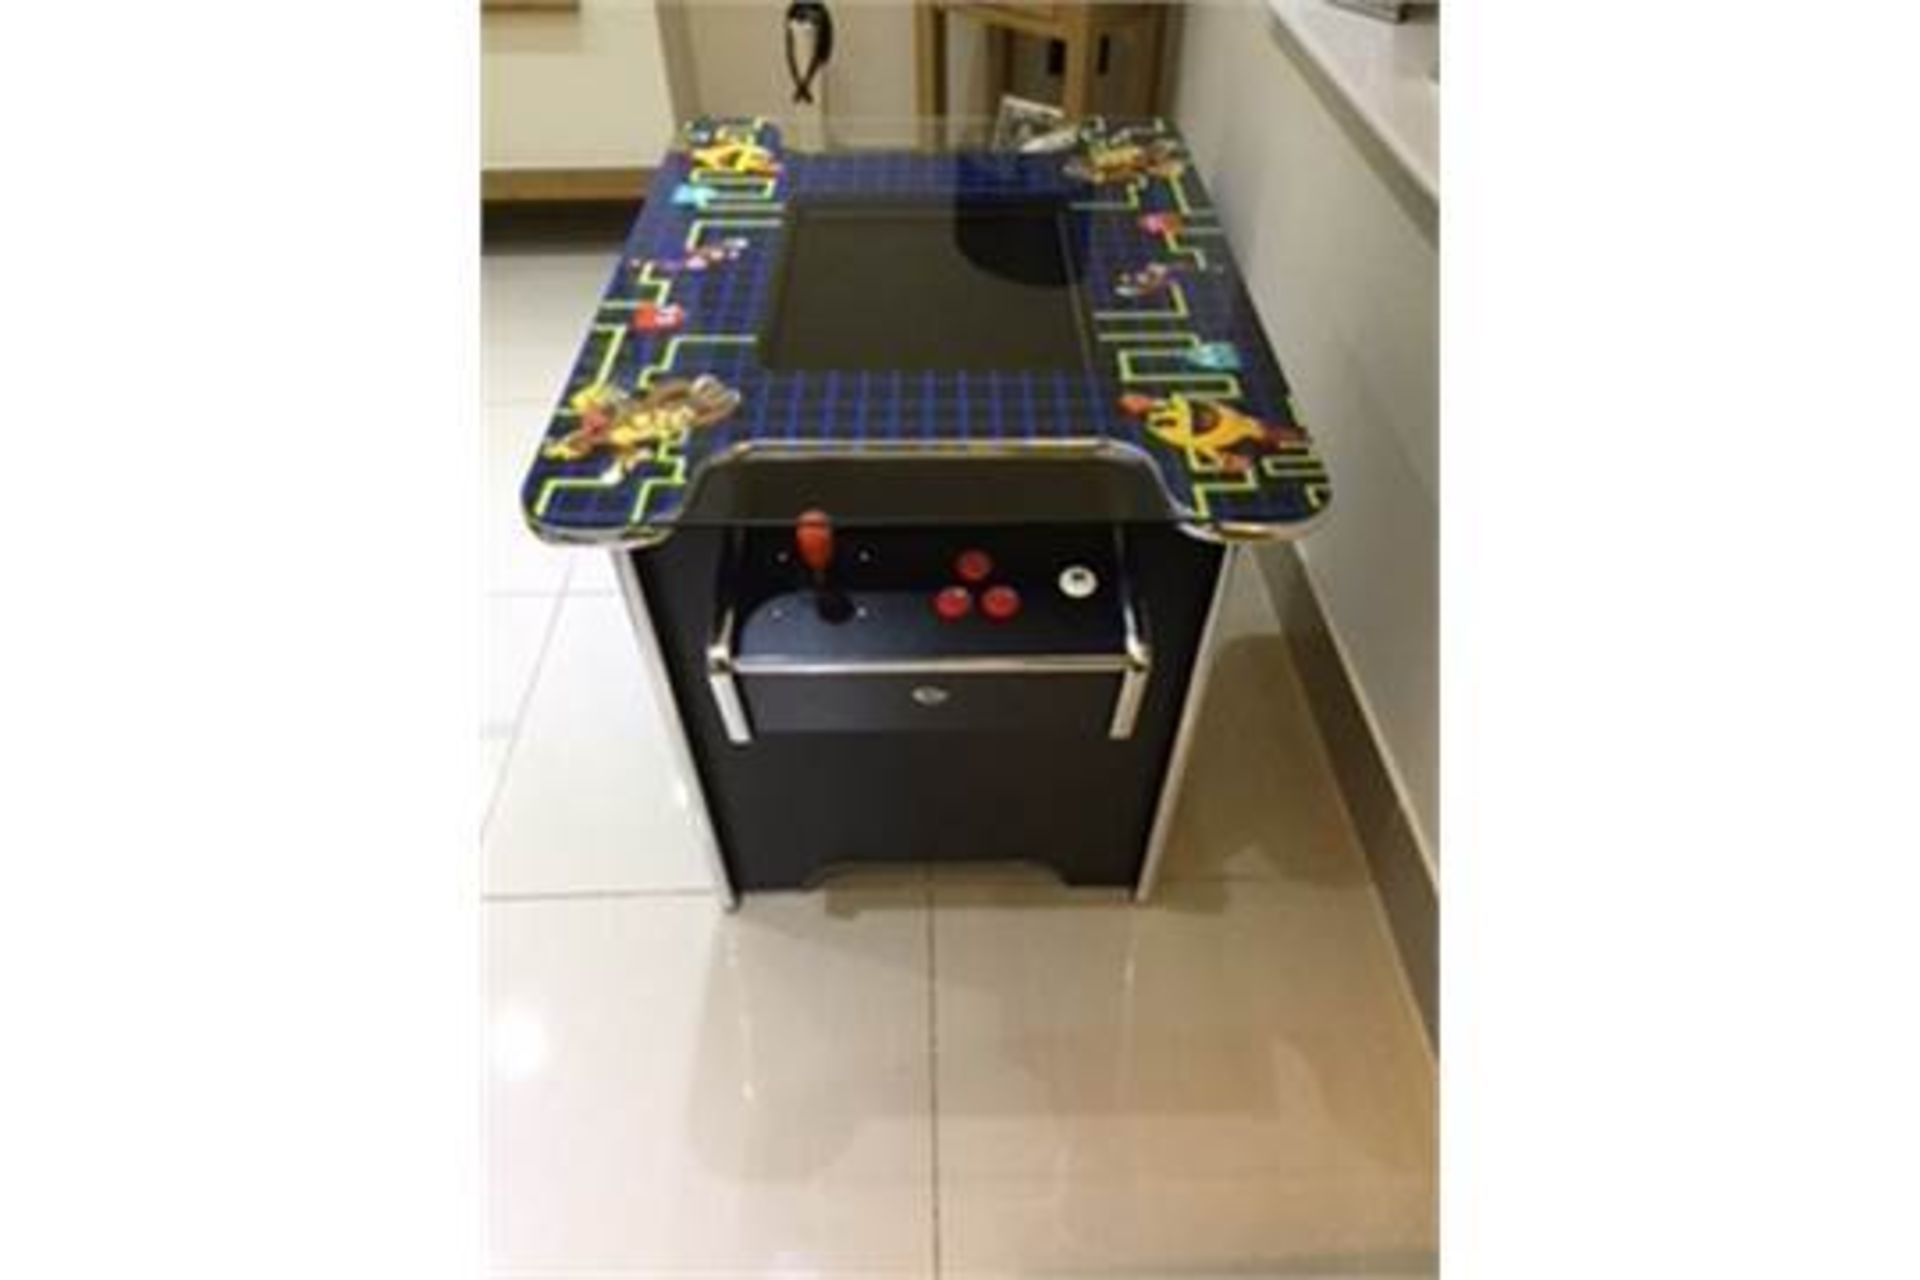 Space Invaders Game Machine -Brand New & Boxed with over 60 Games from the 80's to choose from - Image 4 of 6